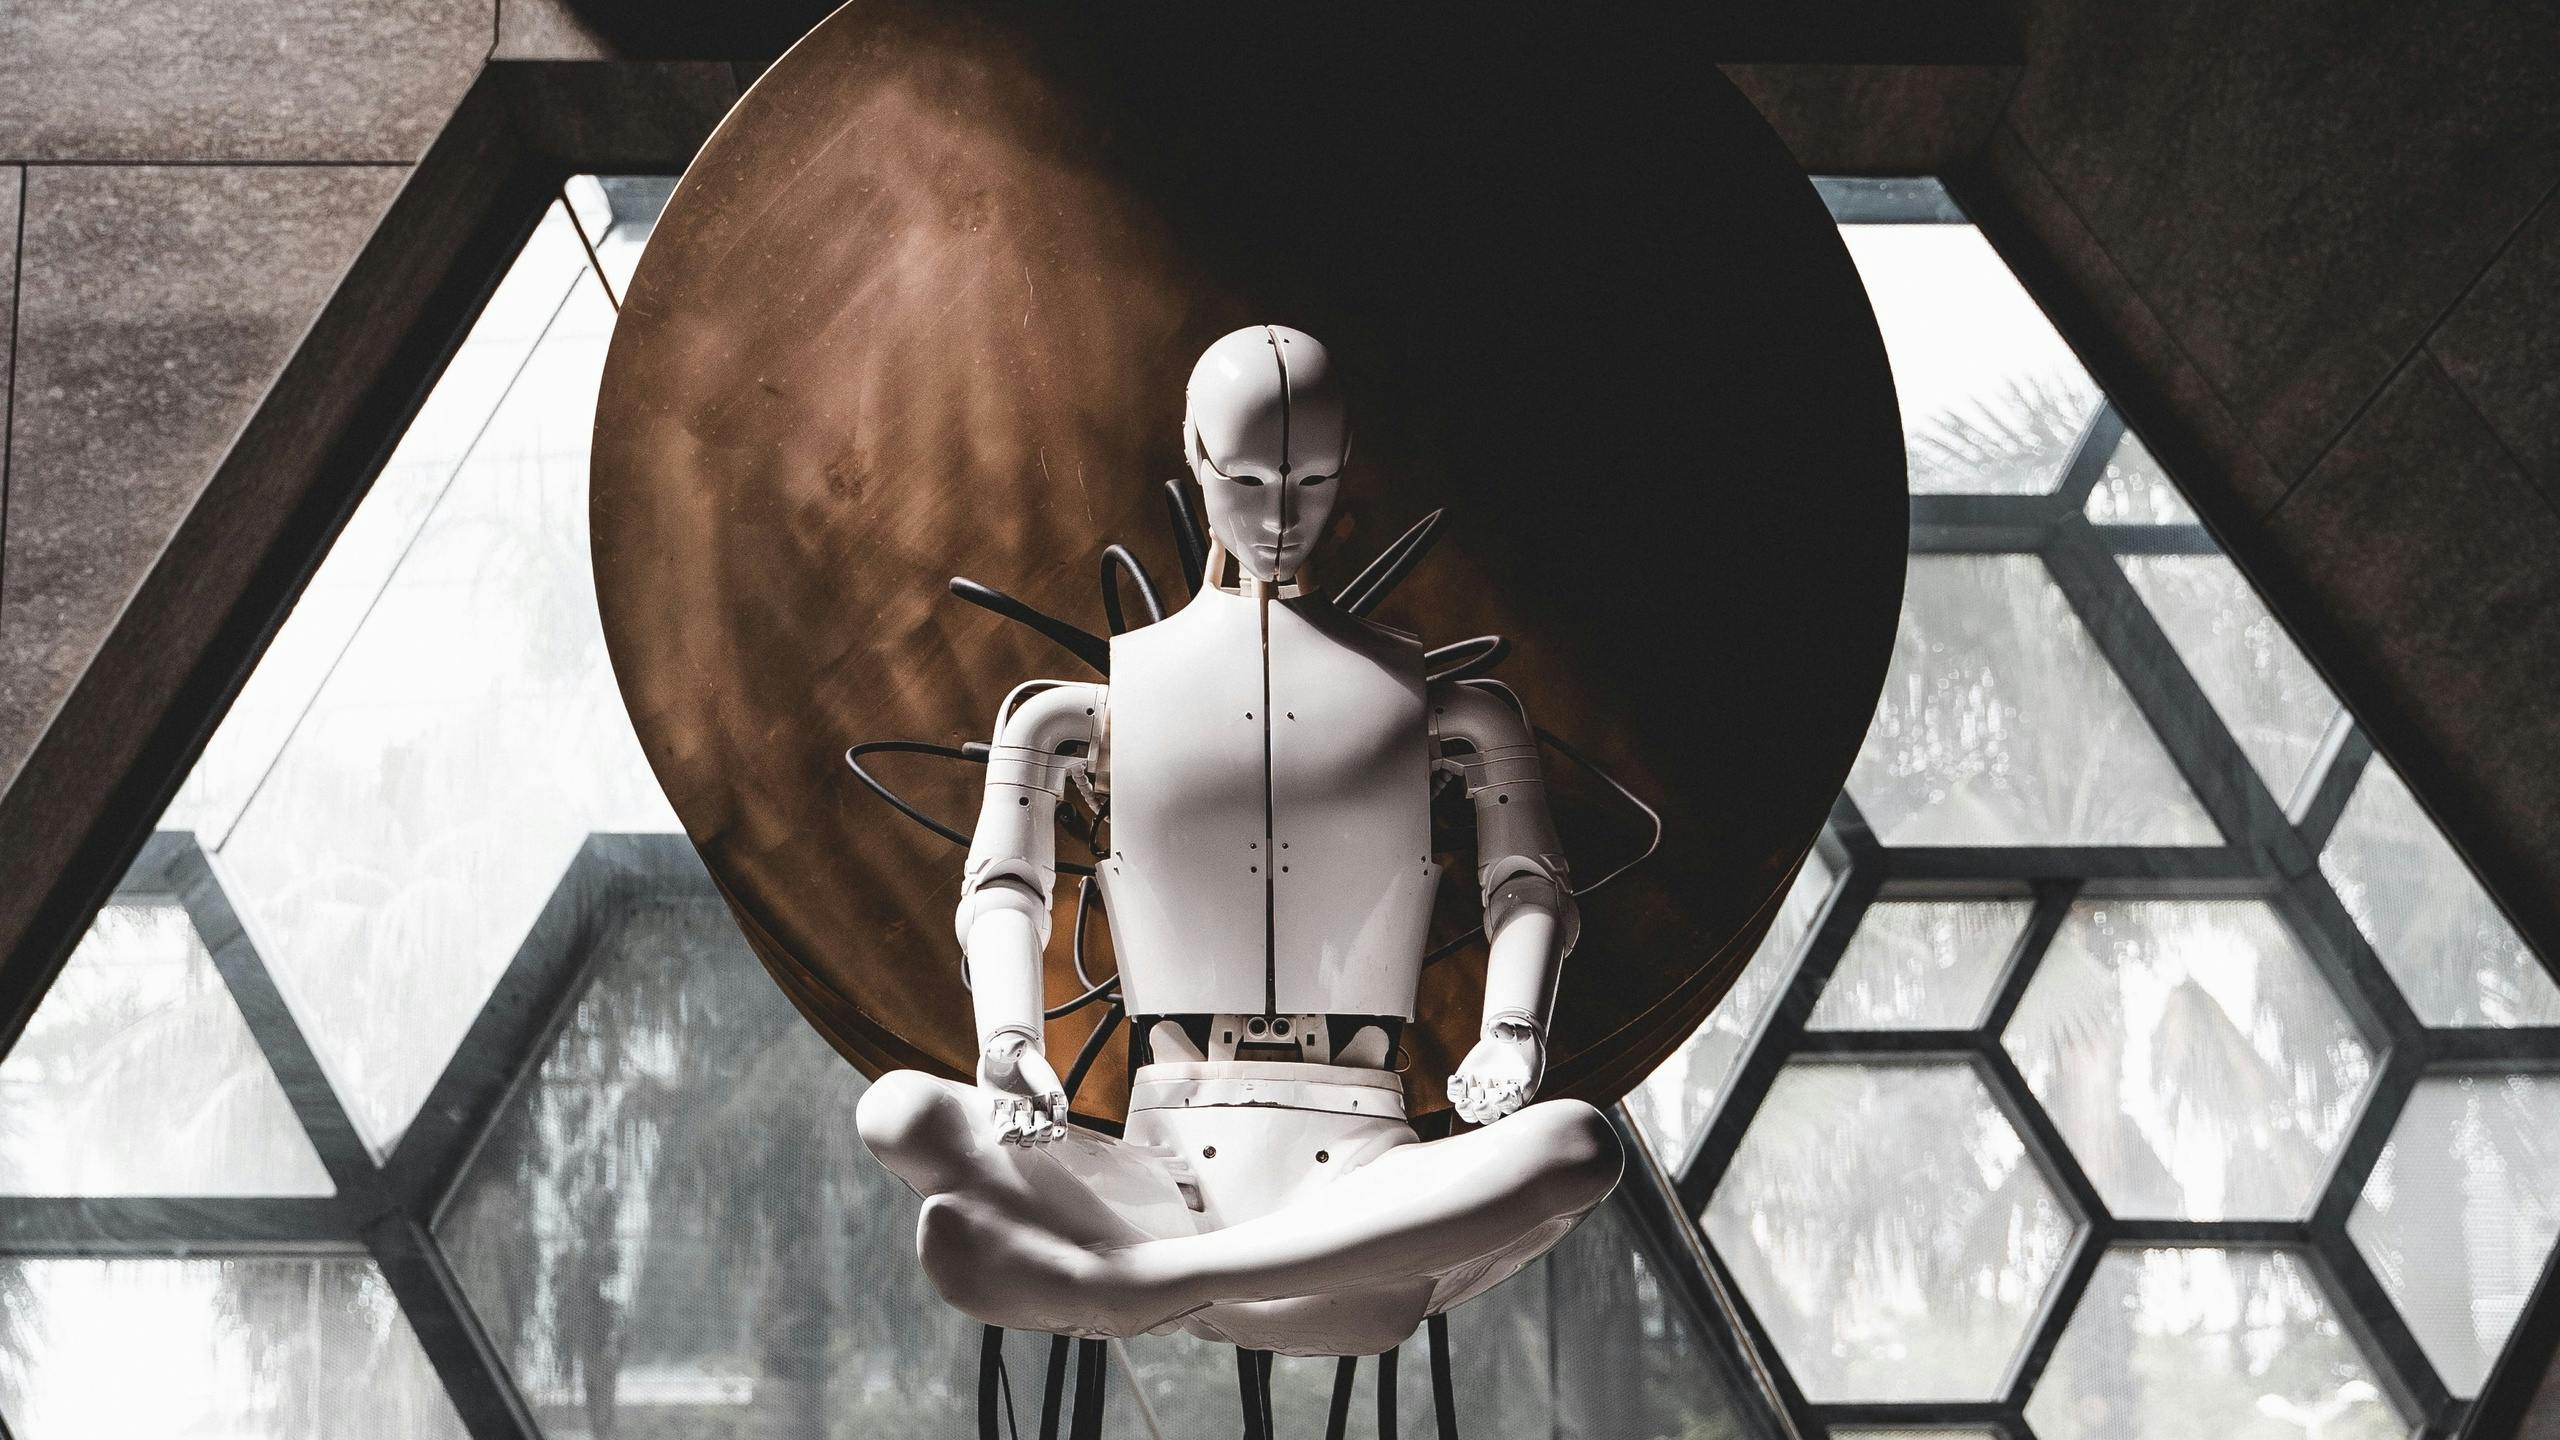 Robot seated in meditation